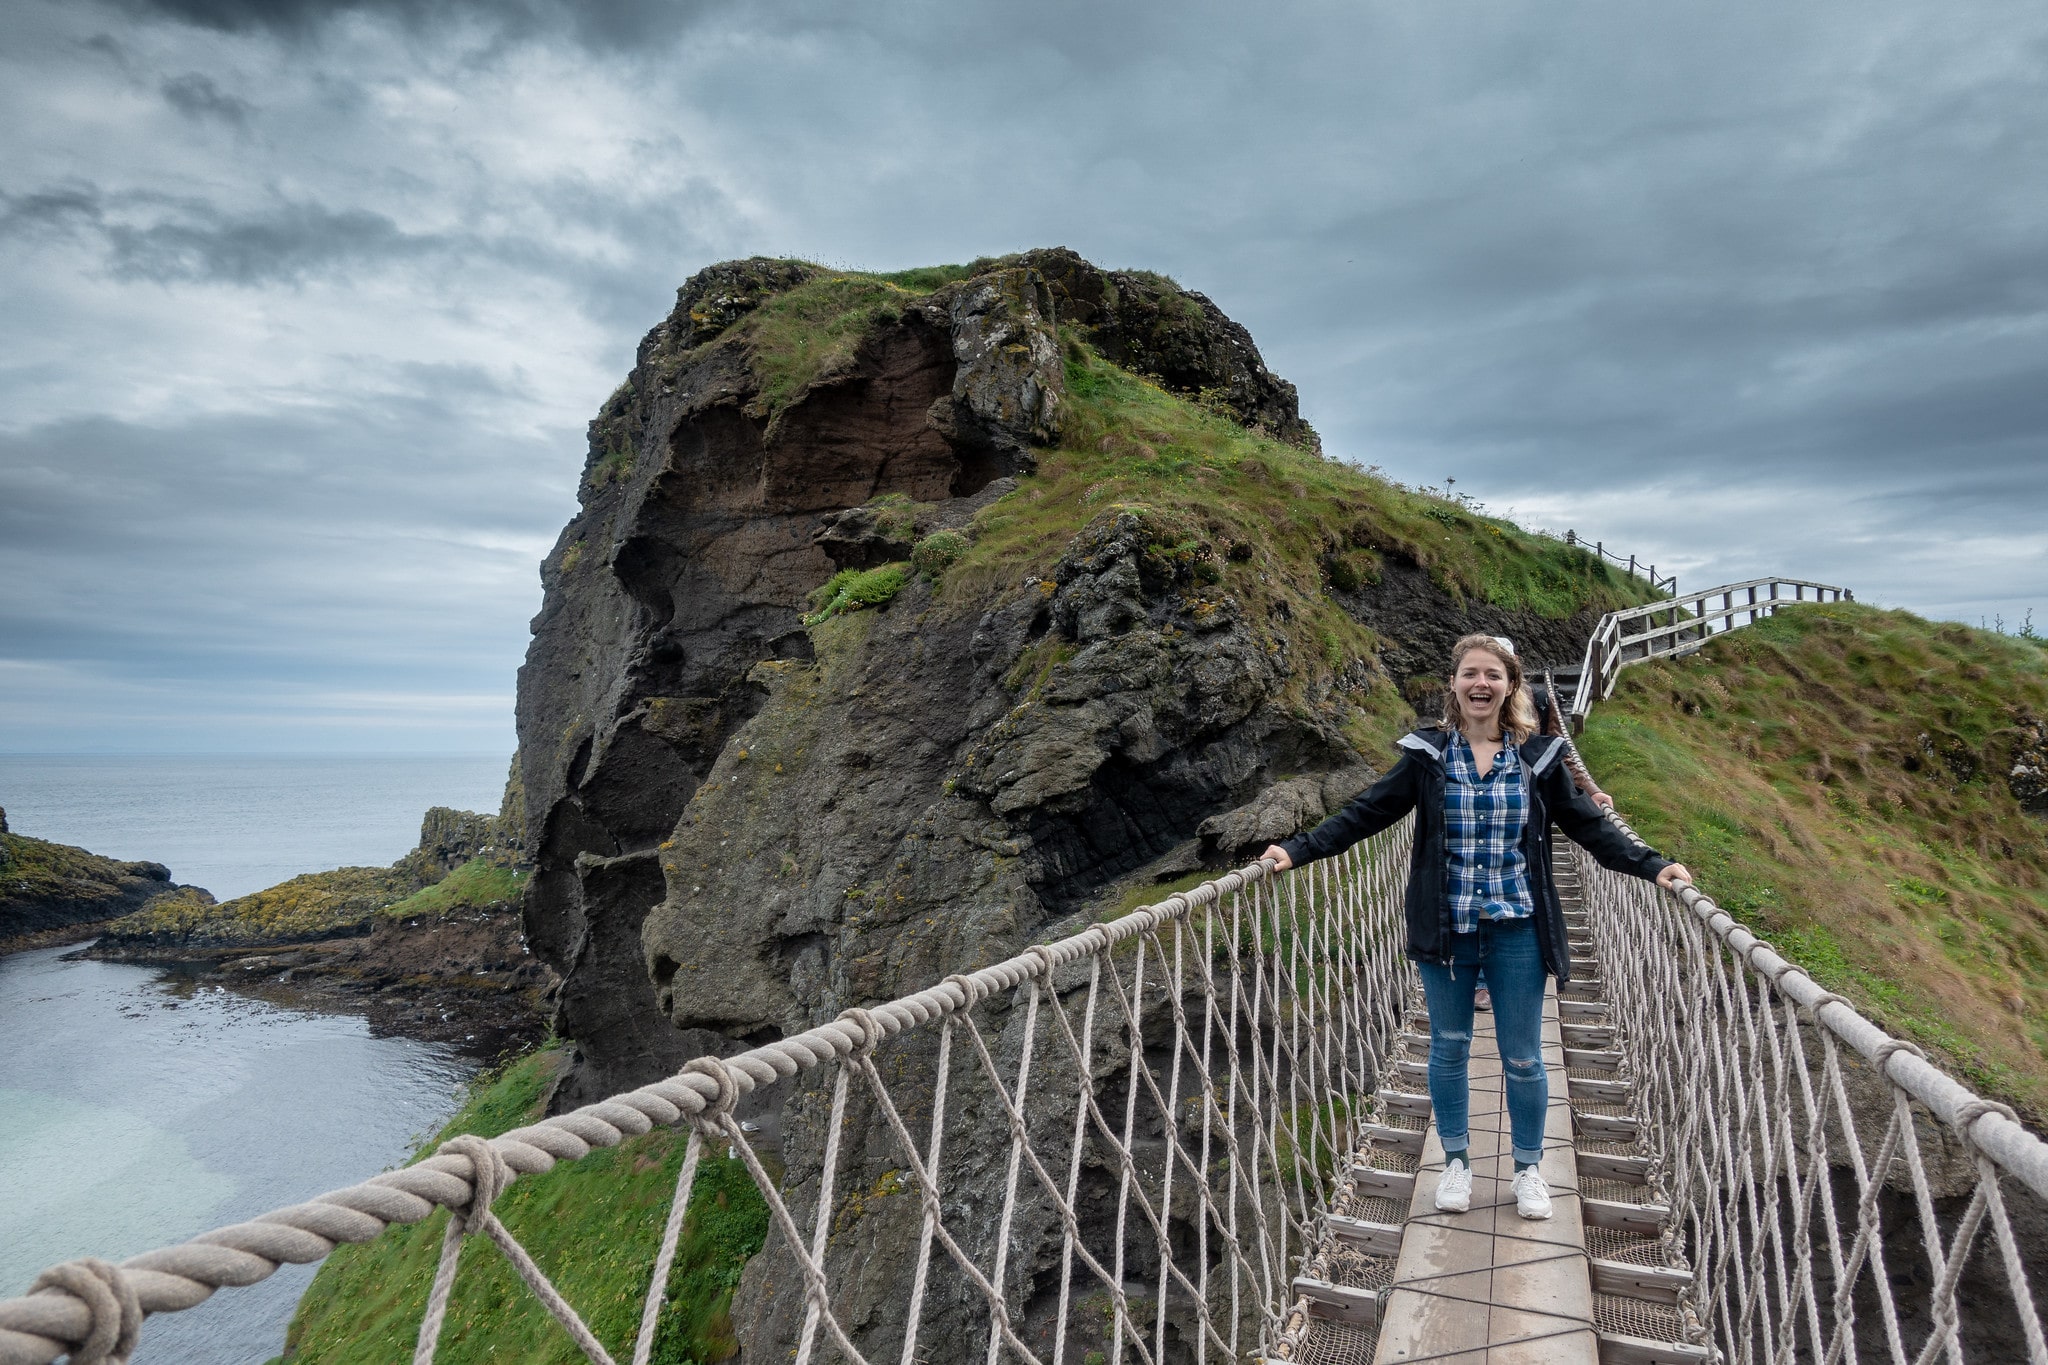 Crossing Carrick-a-Rede Rope bridge is one of the best things to do in Northern Ireland